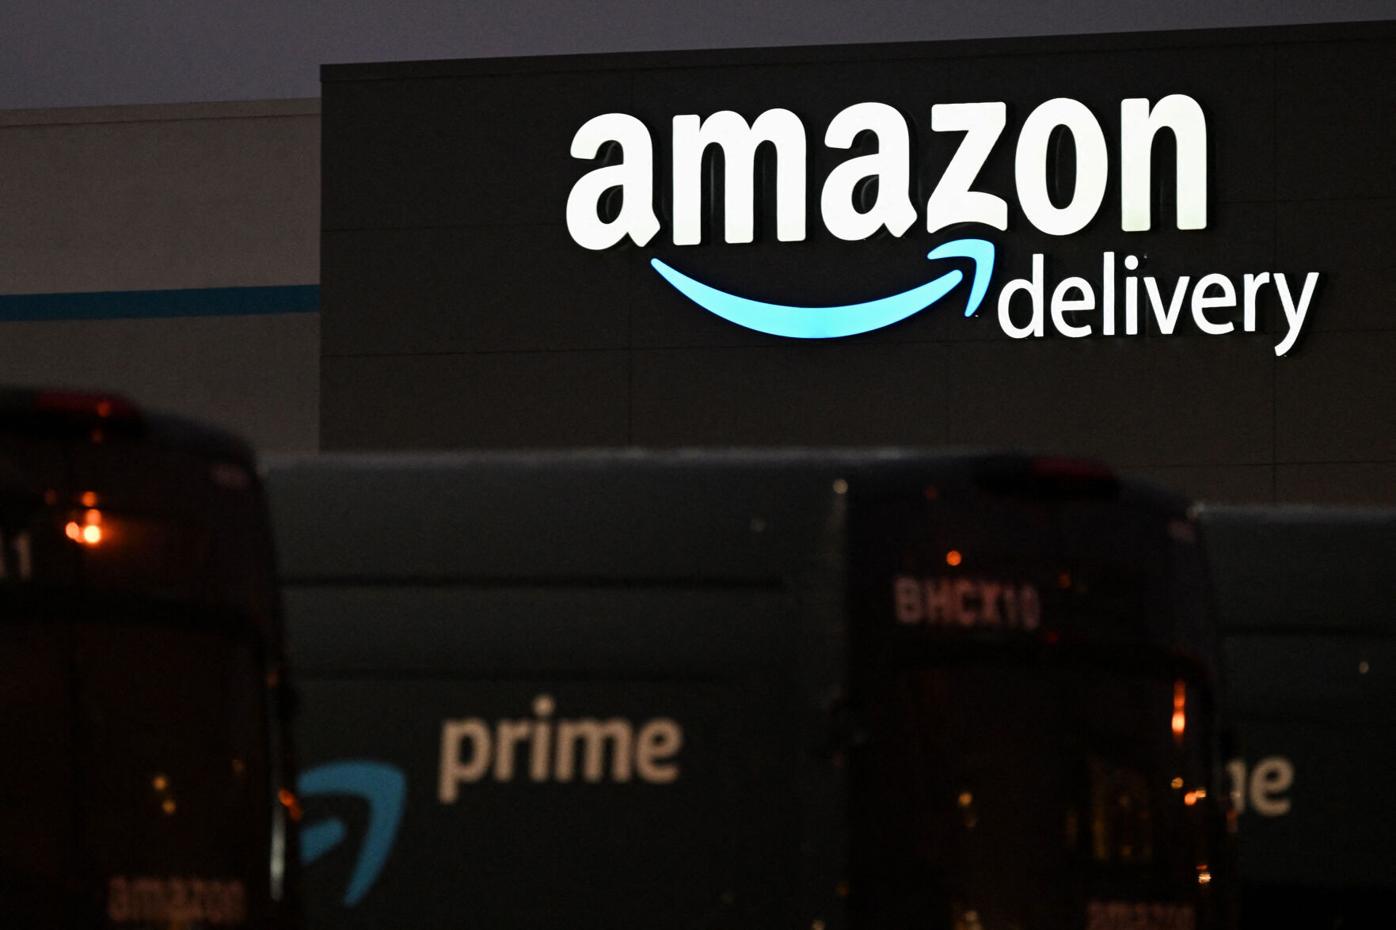 Prime Day announced. Sale starts July 26, see details - The Statesman